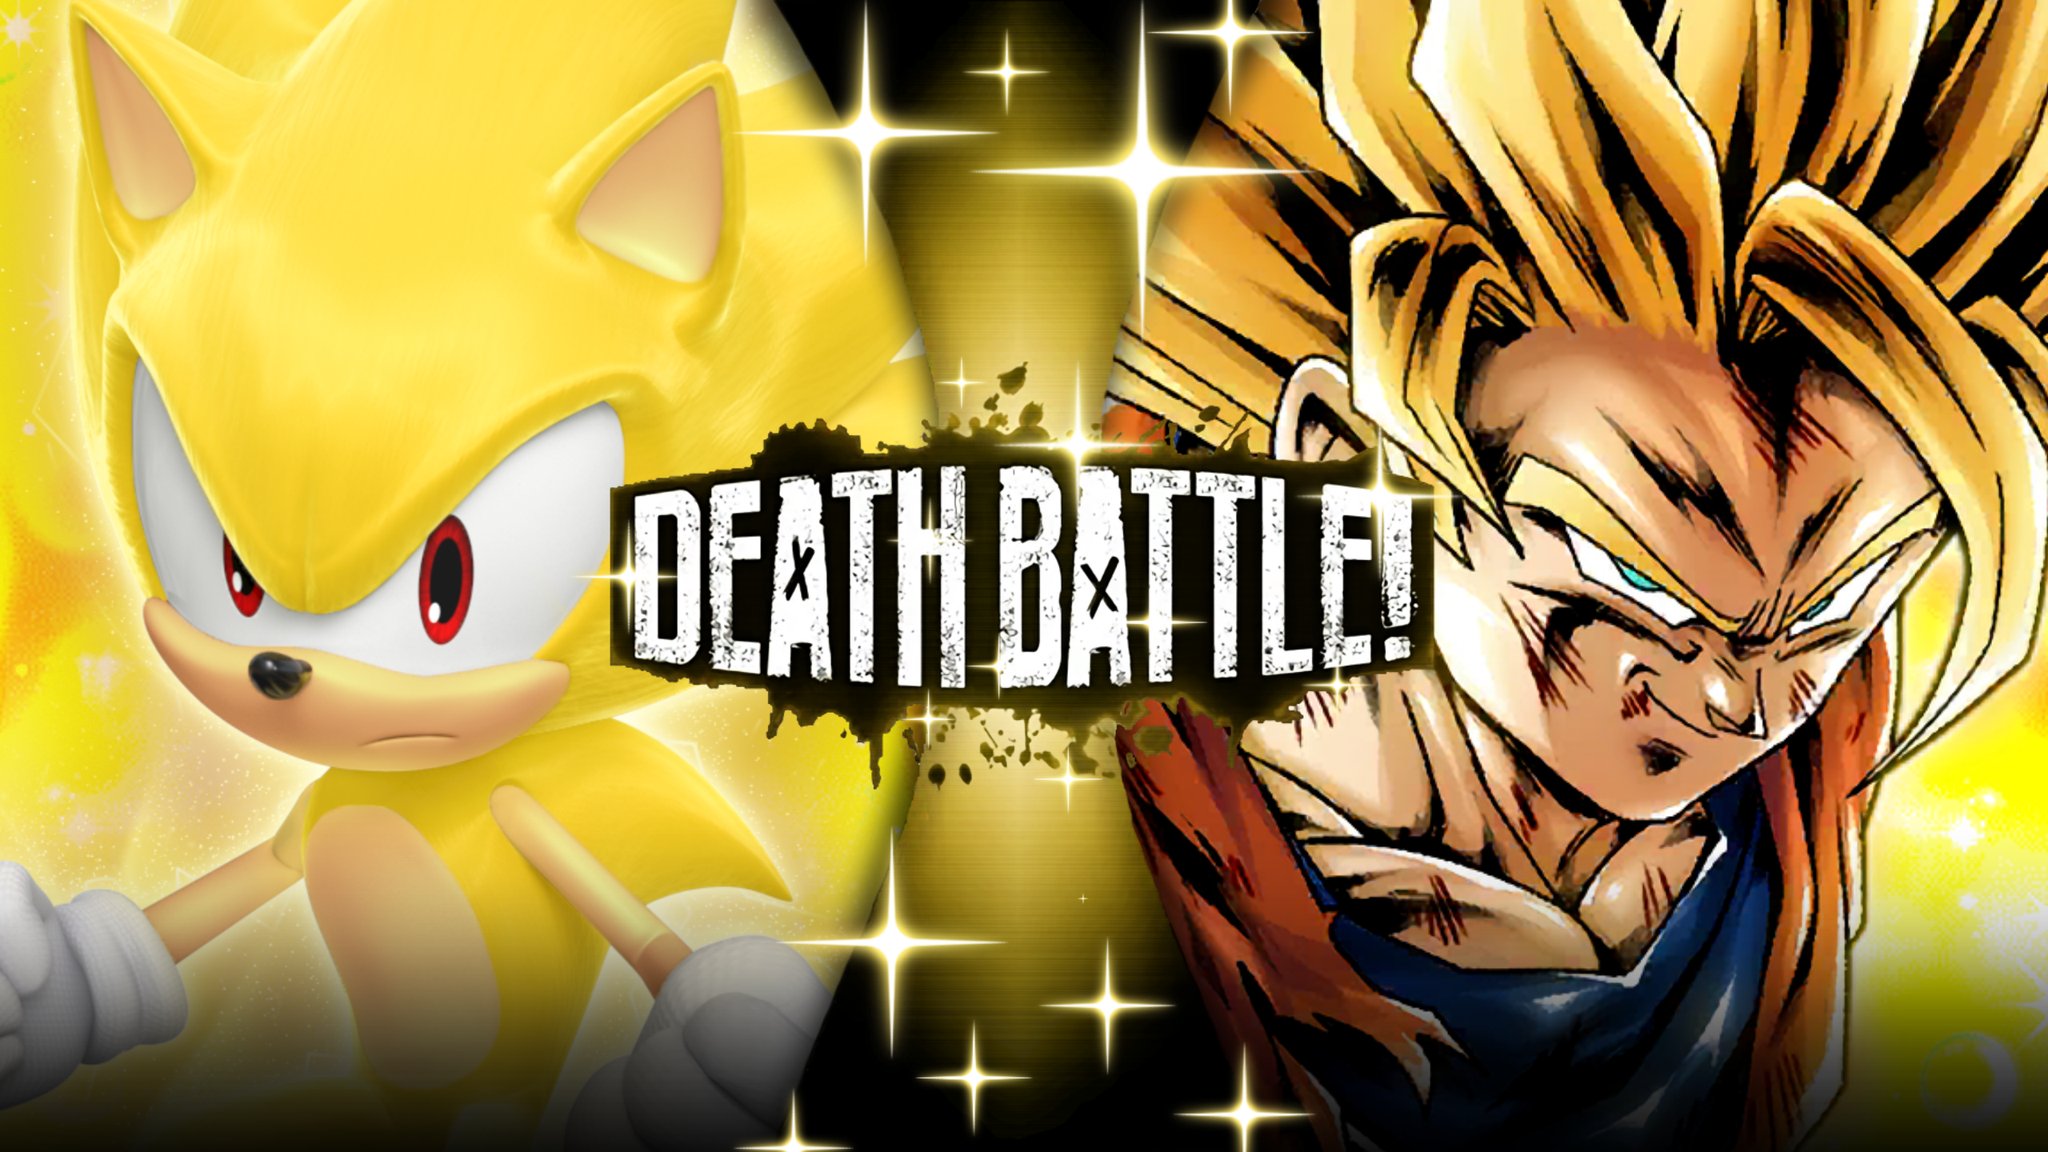 Tatsumaki's arms Fastest Thing Alive vs The Super Saiyan God! If Sonic The Hedgehog were to fight Son Goku (Dragon Ball) in a #DEATHBATTLE! who do you think would